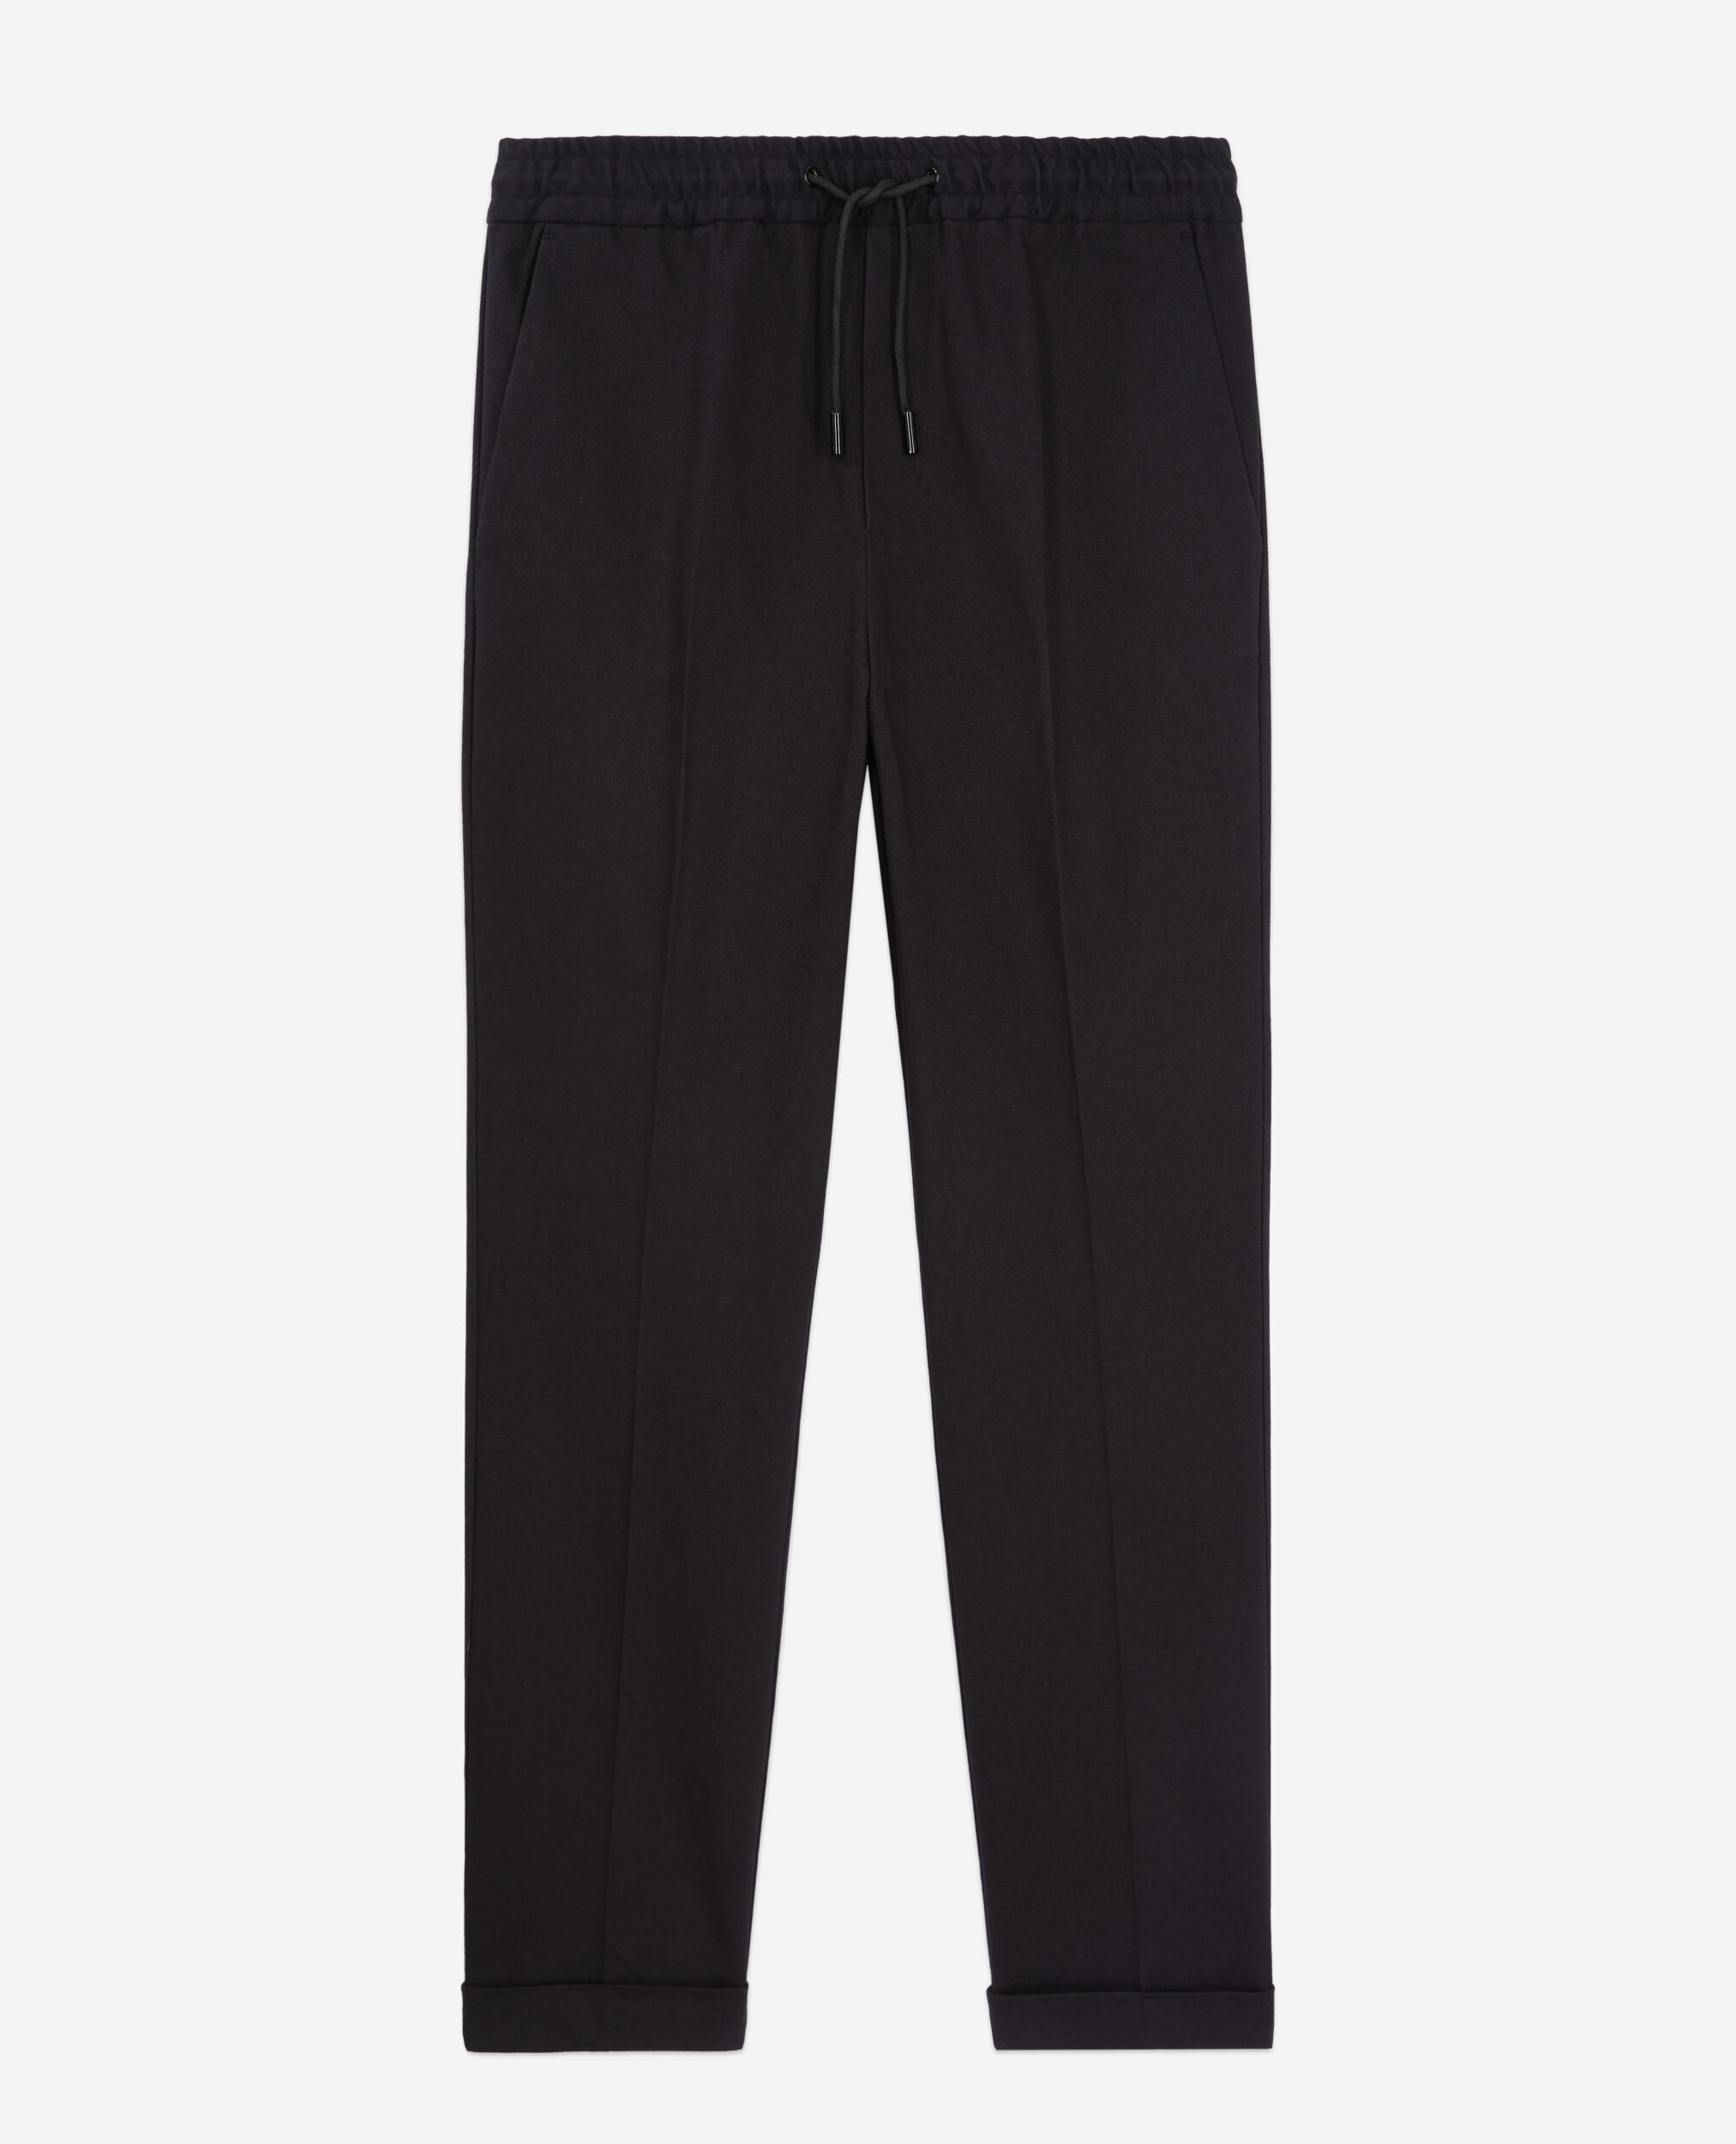 Cotton black trousers, BLACK, hi-res image number null